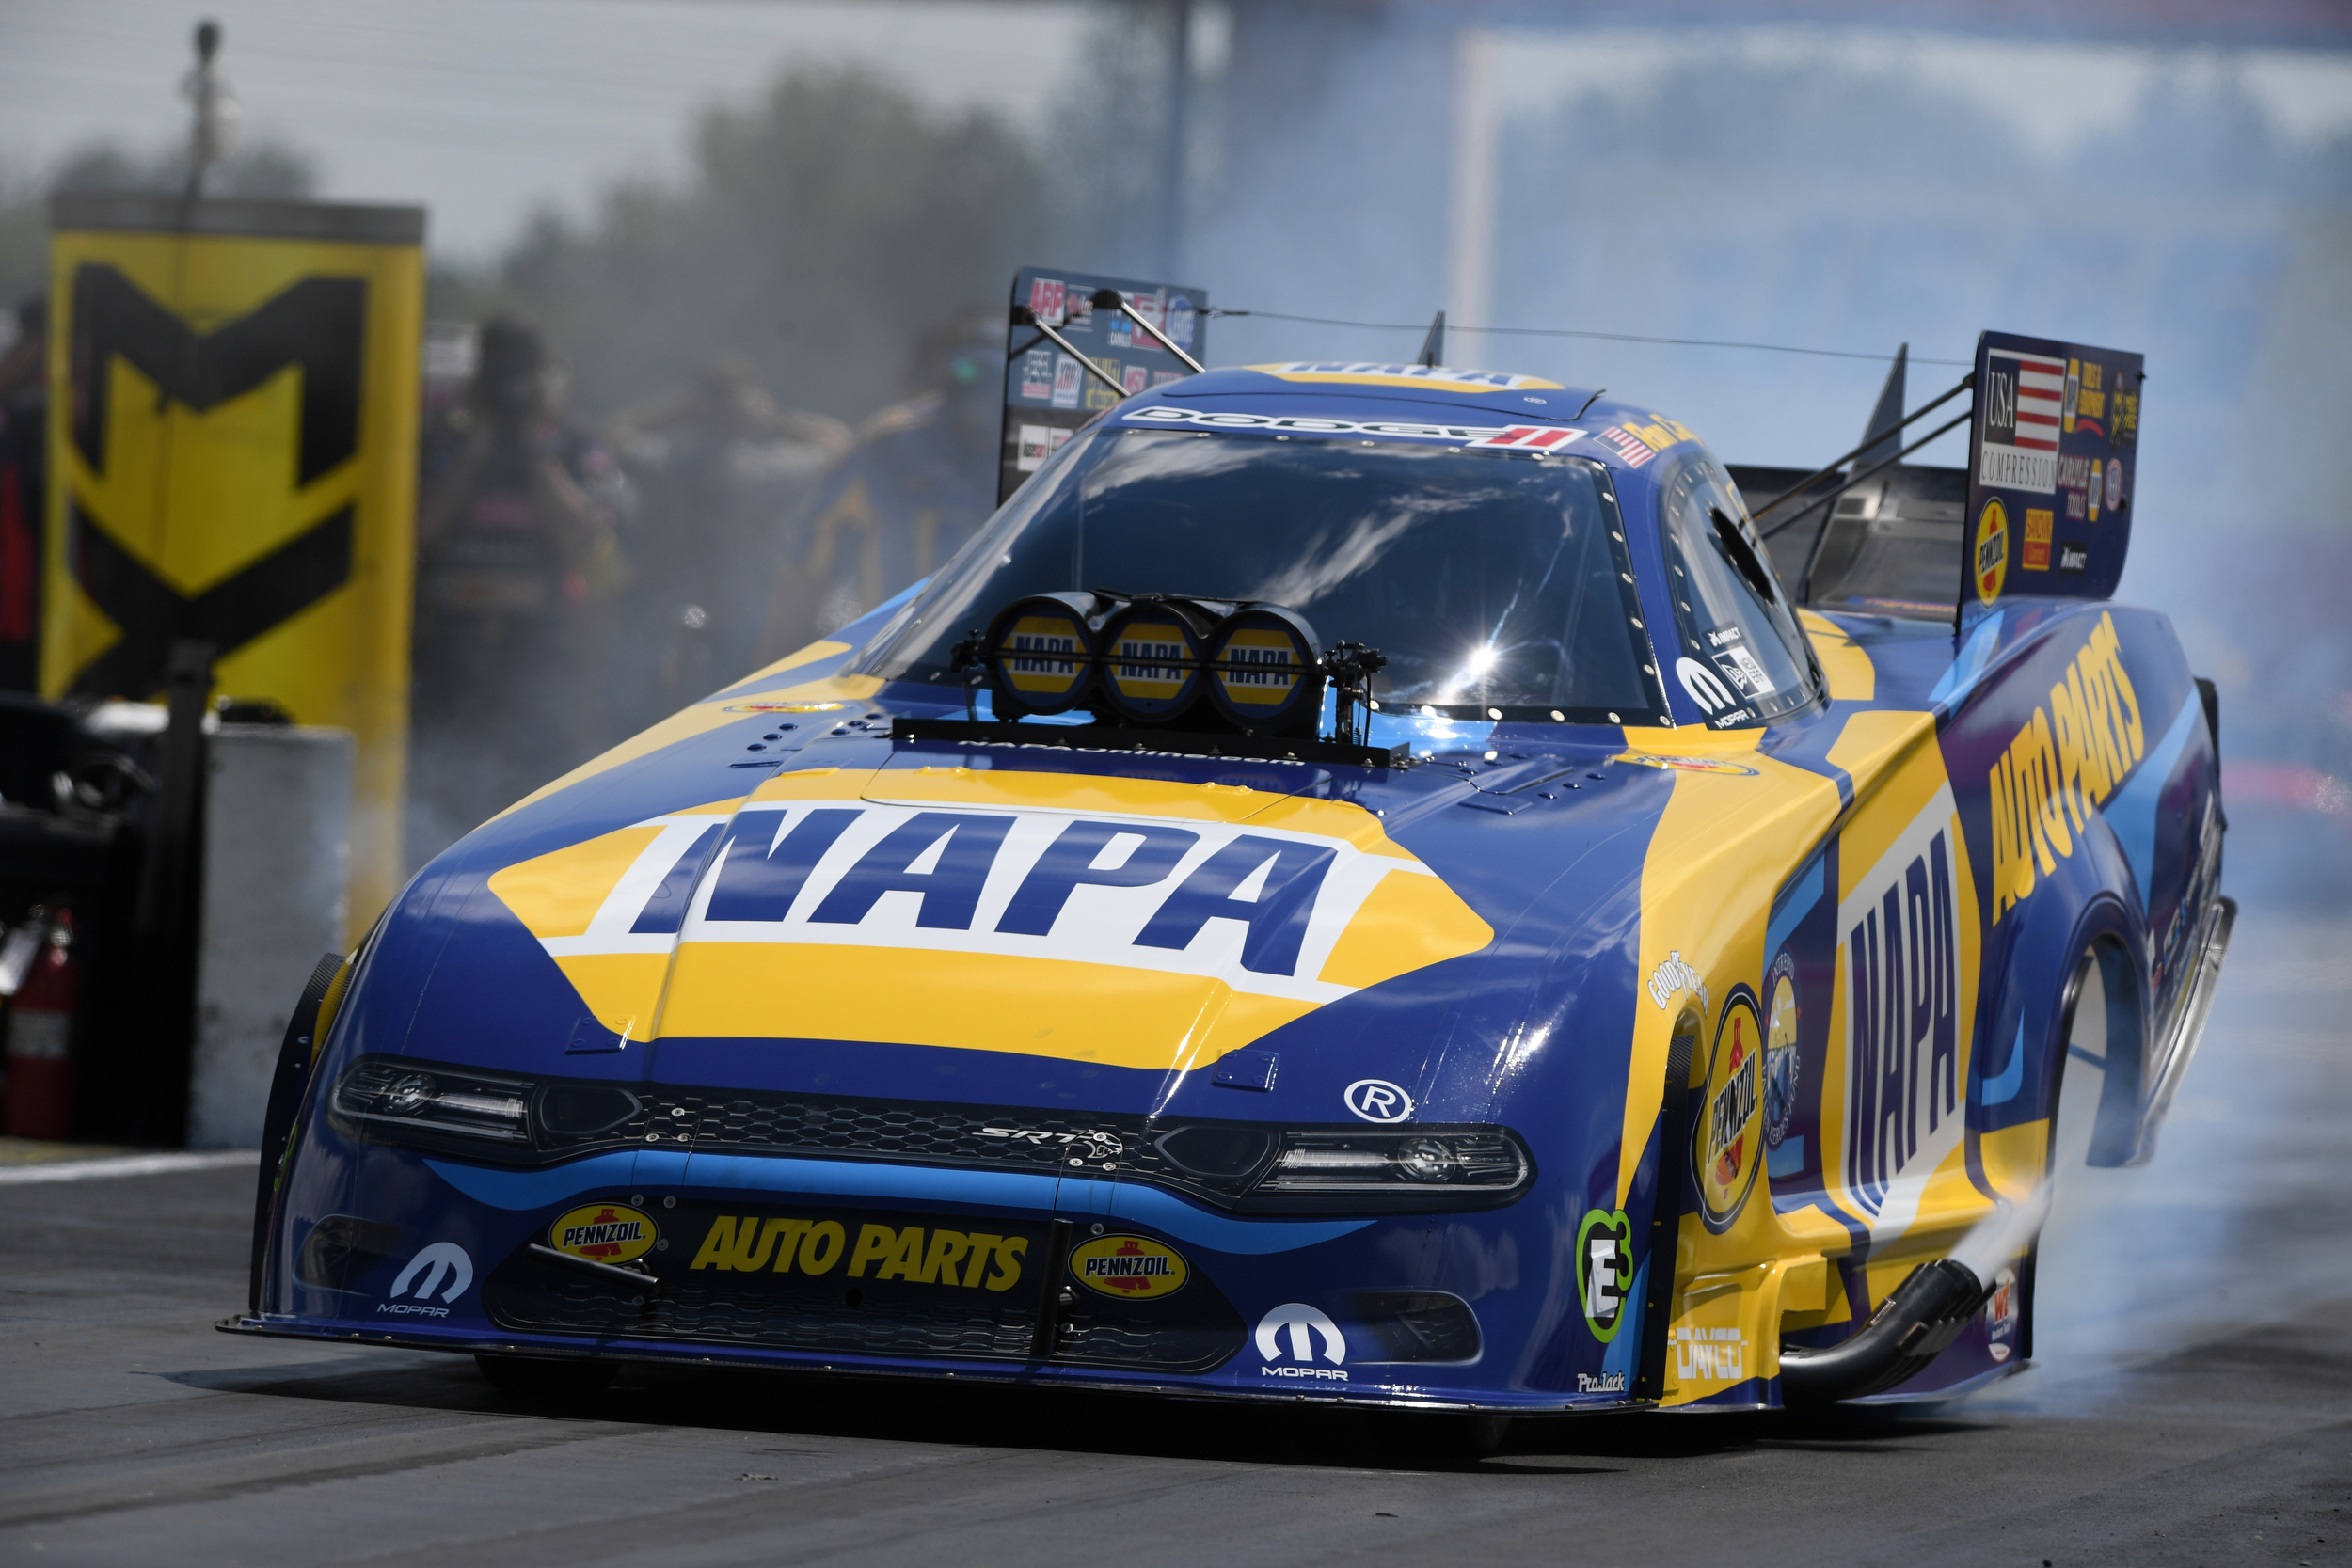 2500x1667 It's A Chance To Make History For NHRA Racers At This Weekend's Prestigious Nationals Drag Illustrated | Drag Racing News, Opinion, Interviews, Photos, Videos and More